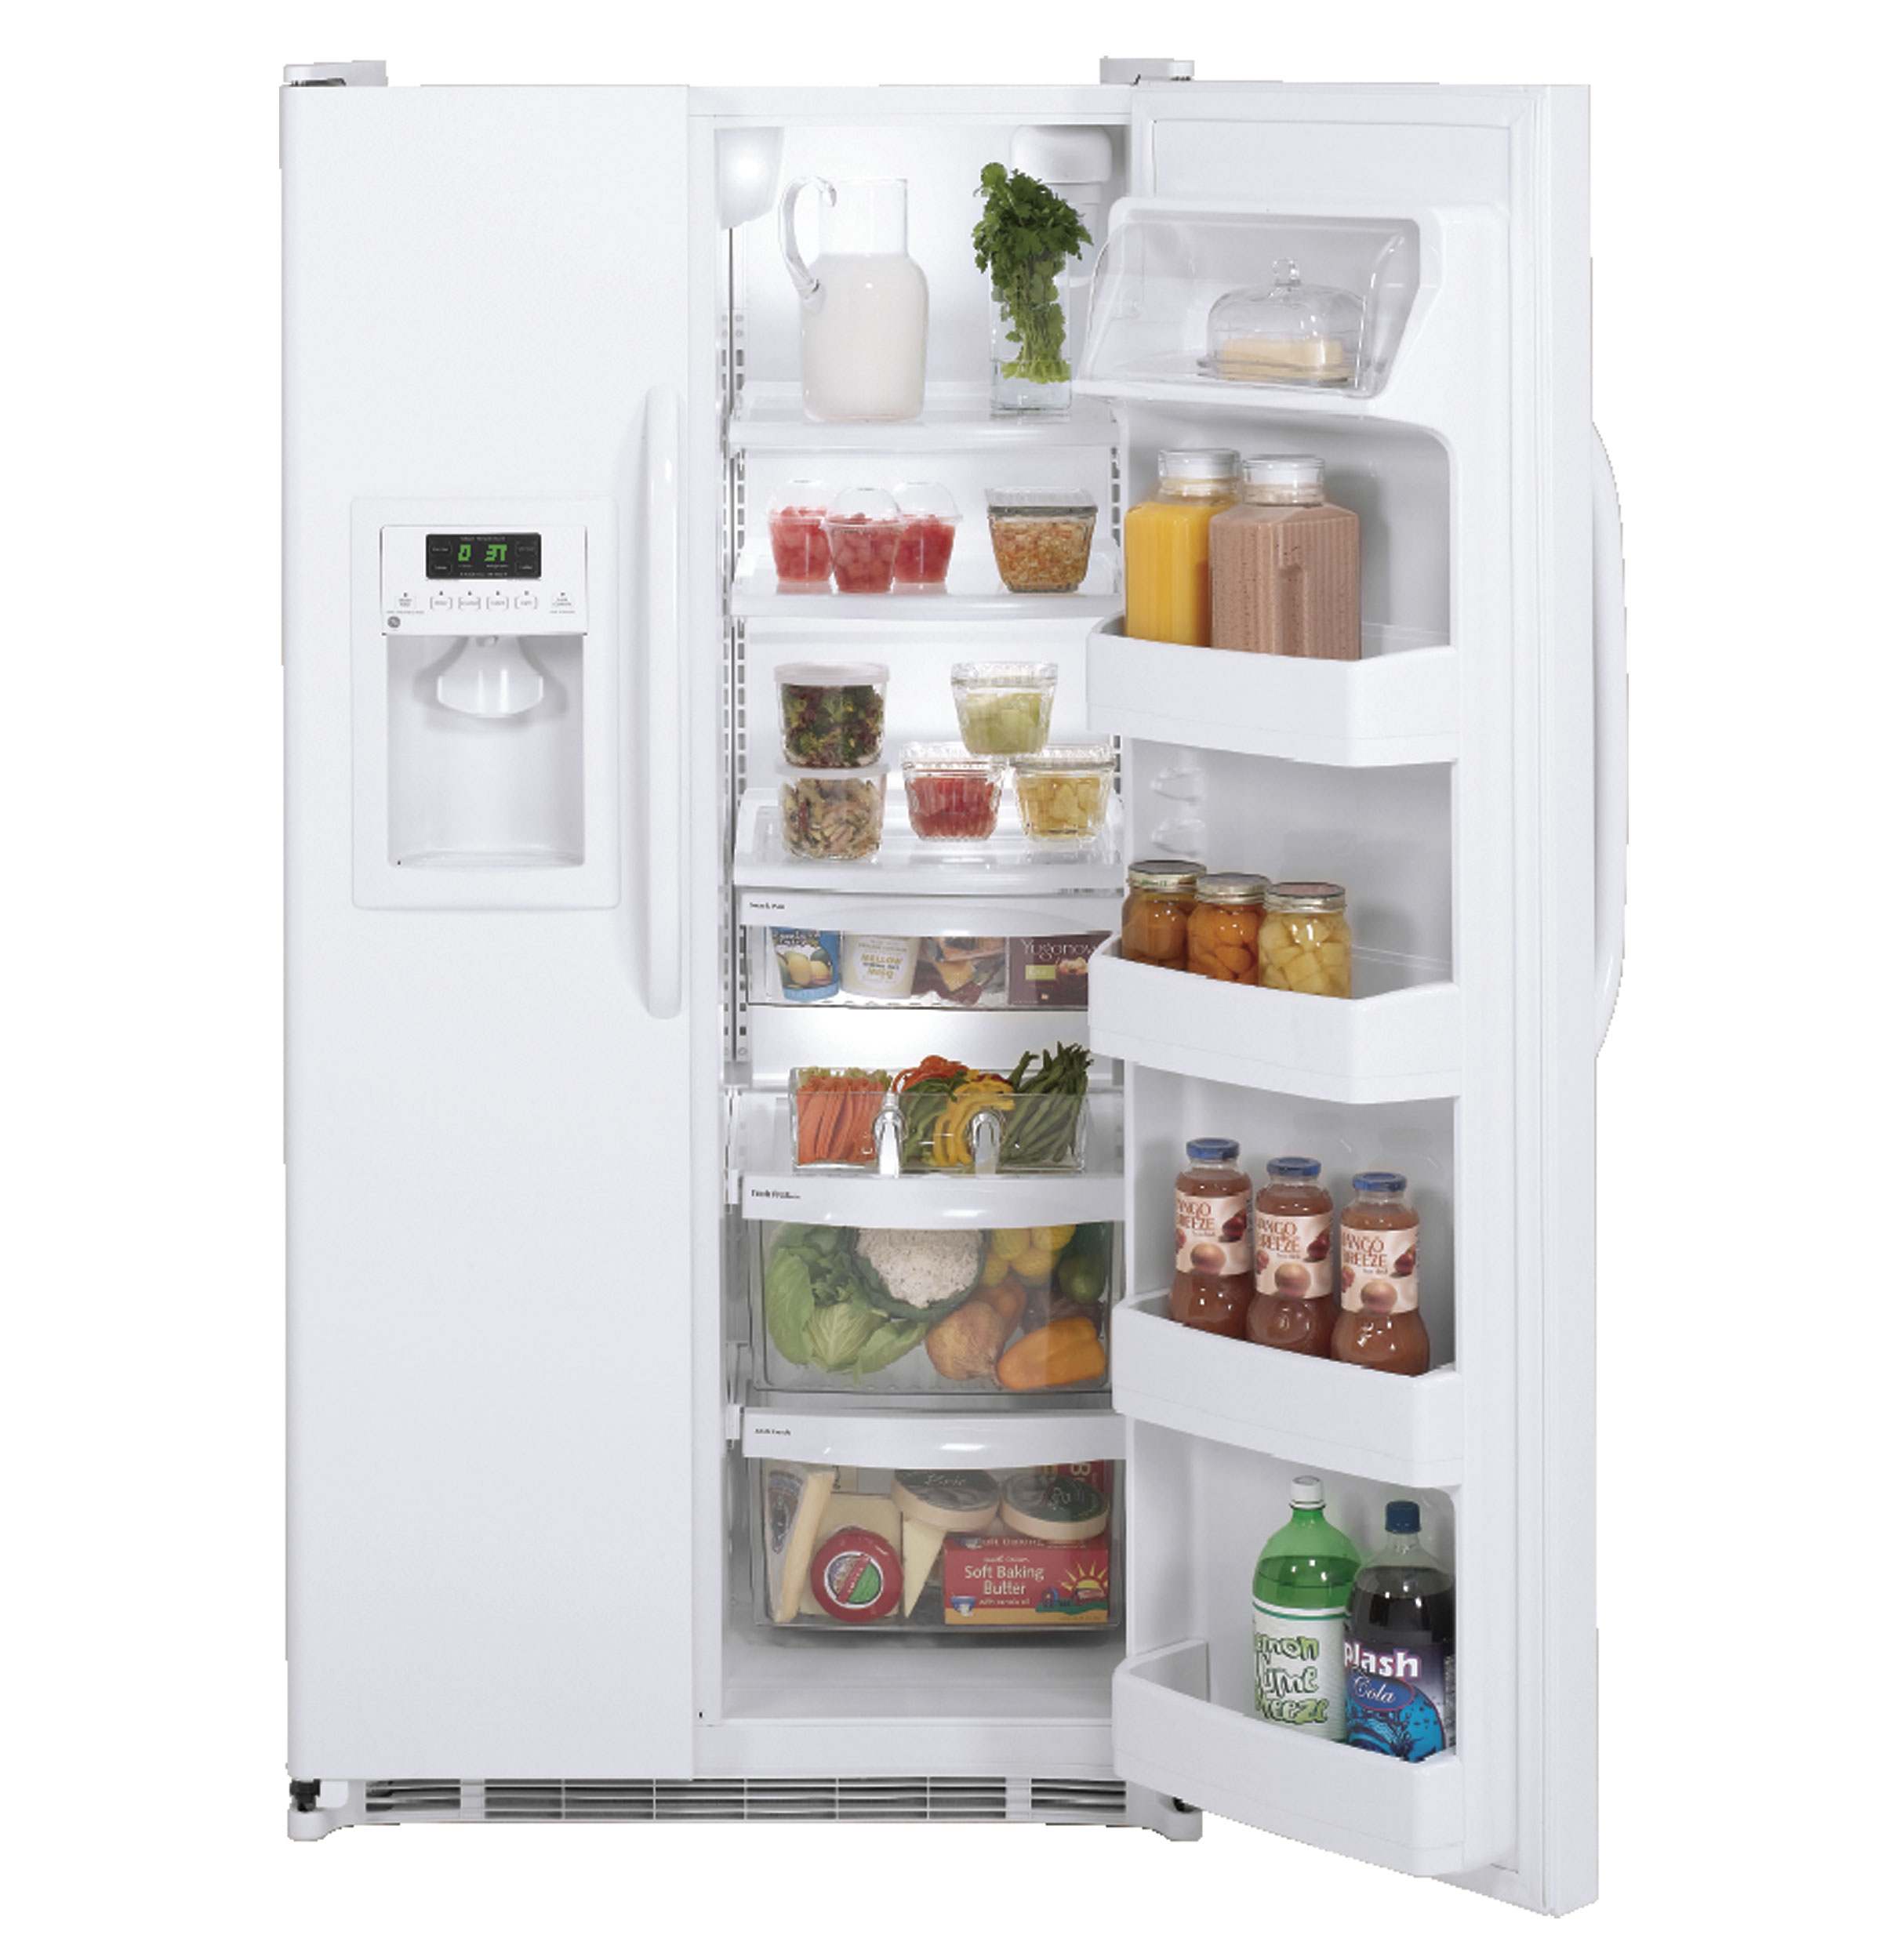 GE® ENERGY STAR® 21.9 Cu. Ft. Side-By-Side Refrigerator with Dispenser